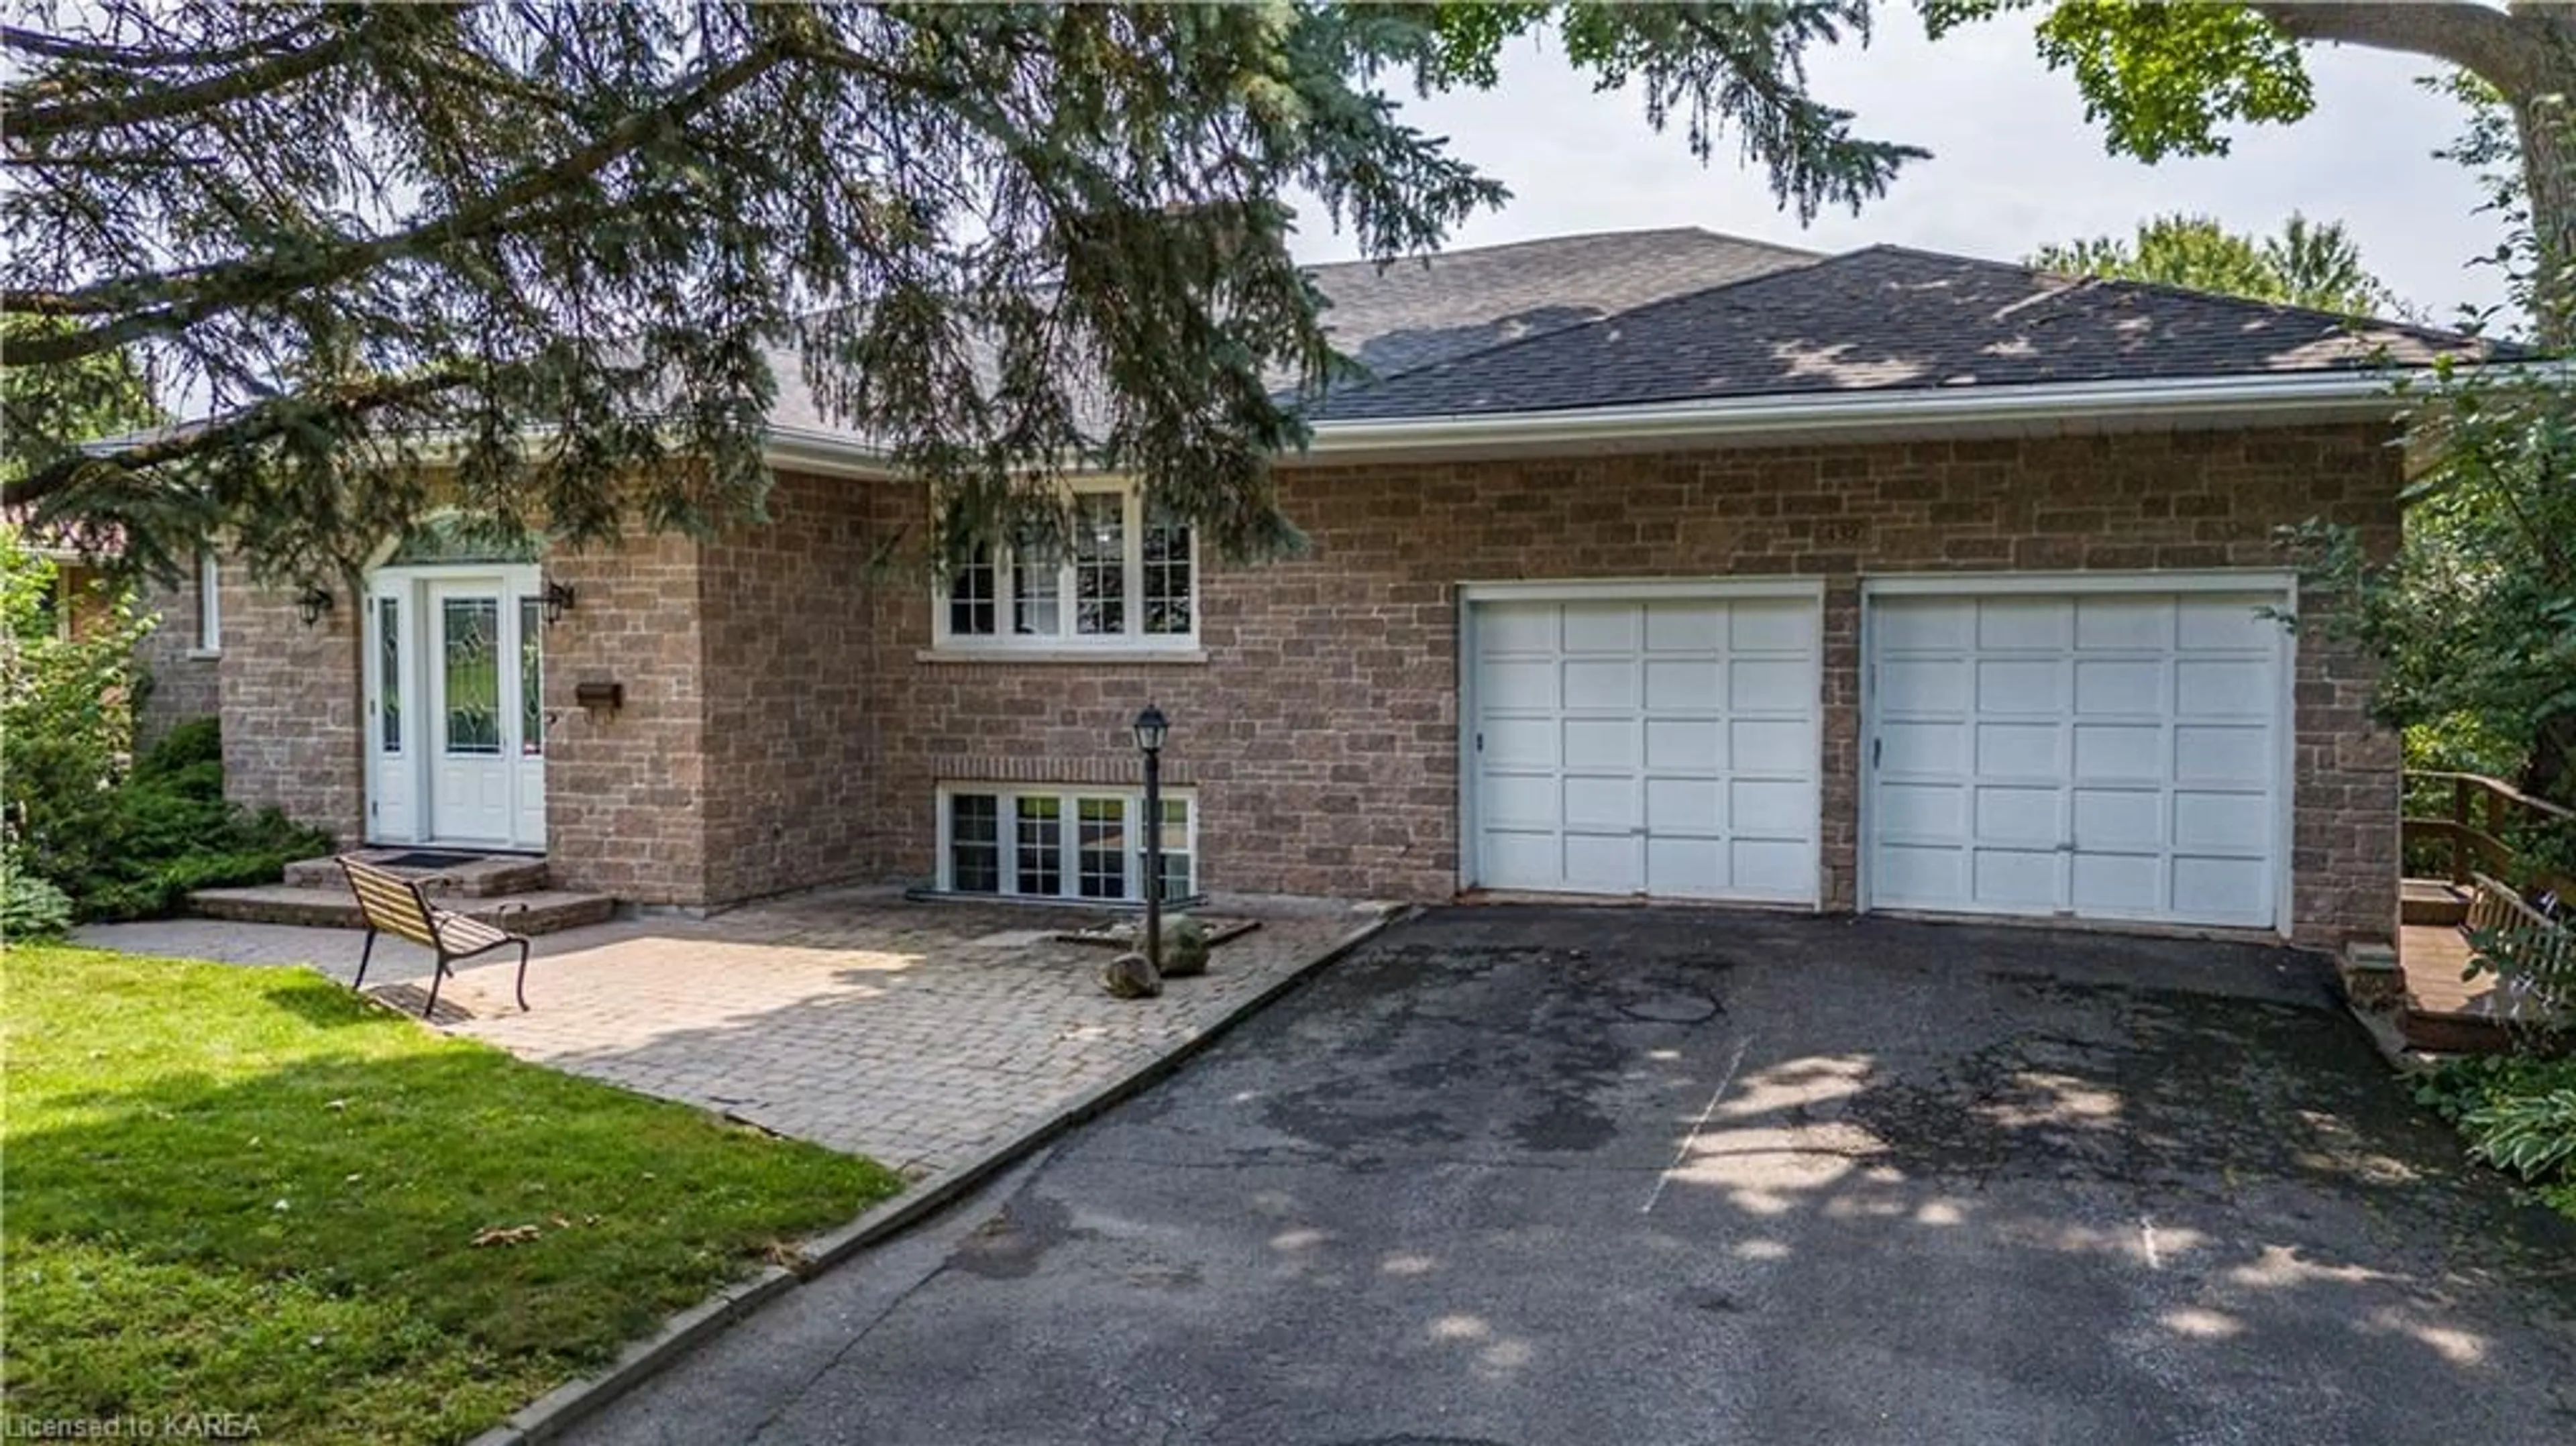 Home with brick exterior material for 432 Southwood Dr, Kingston Ontario K7M 5P6